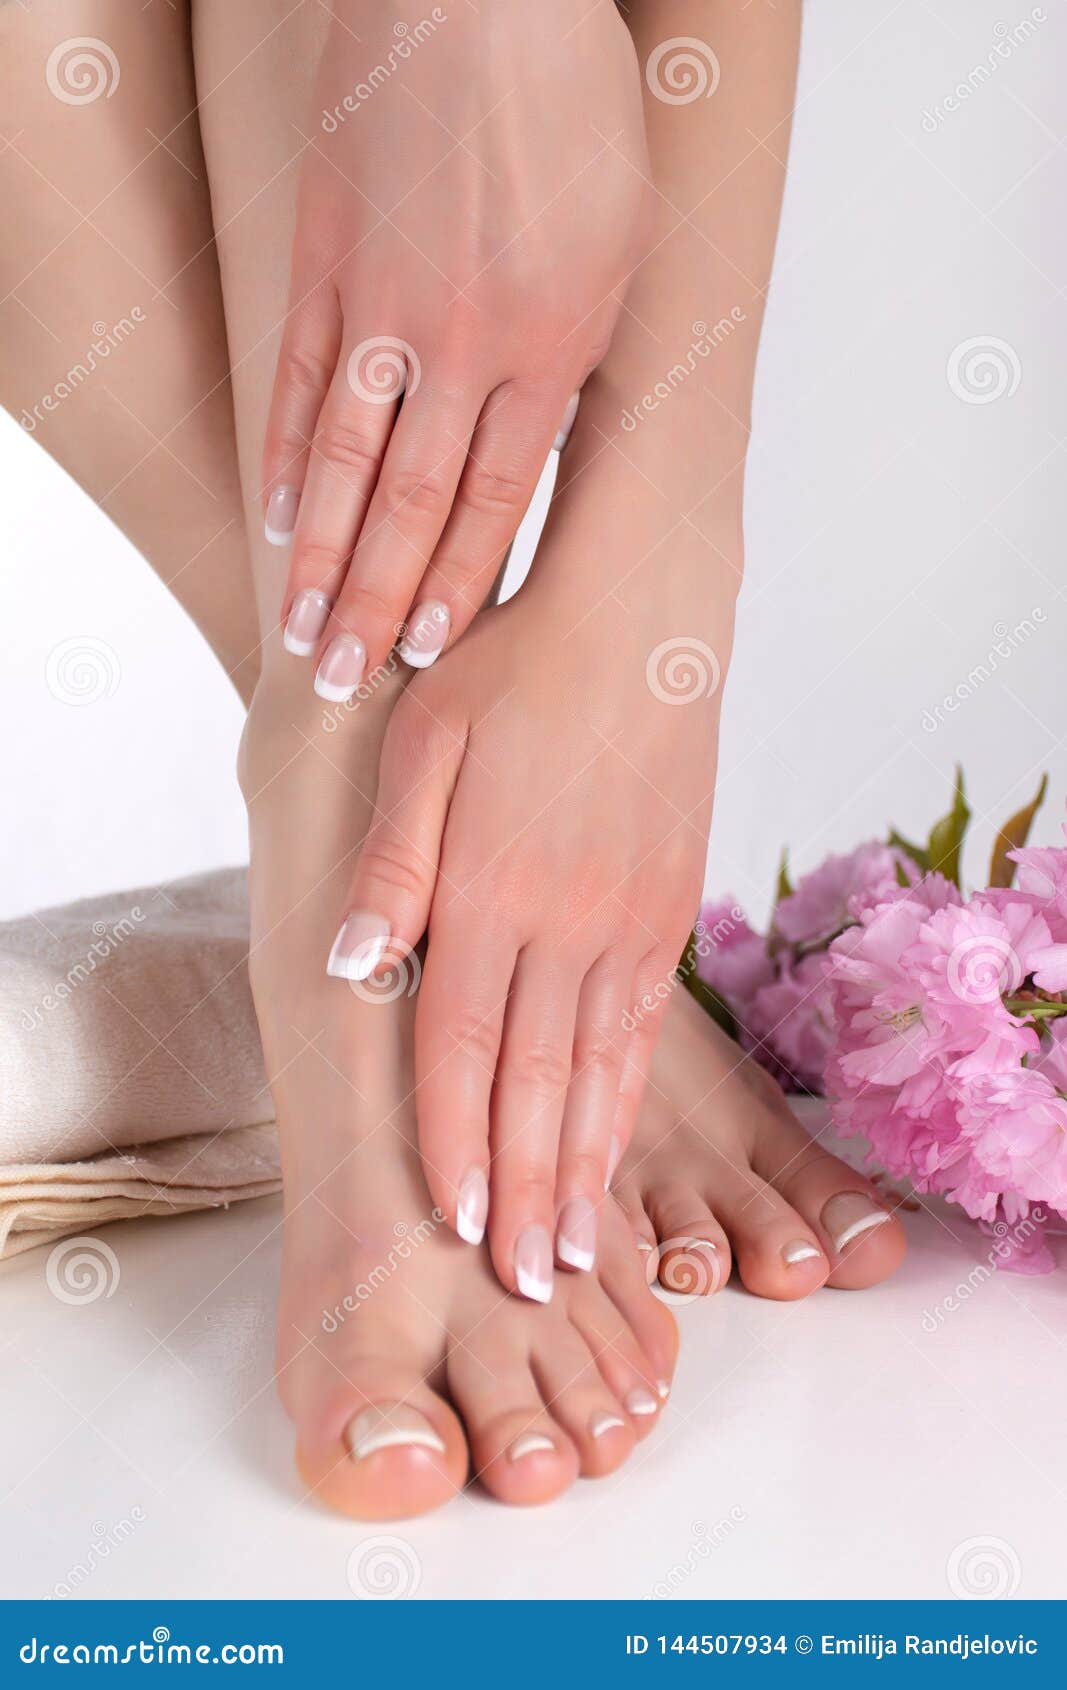 How to Do a French Pedicure at Home: 13 Steps (With Pictures)